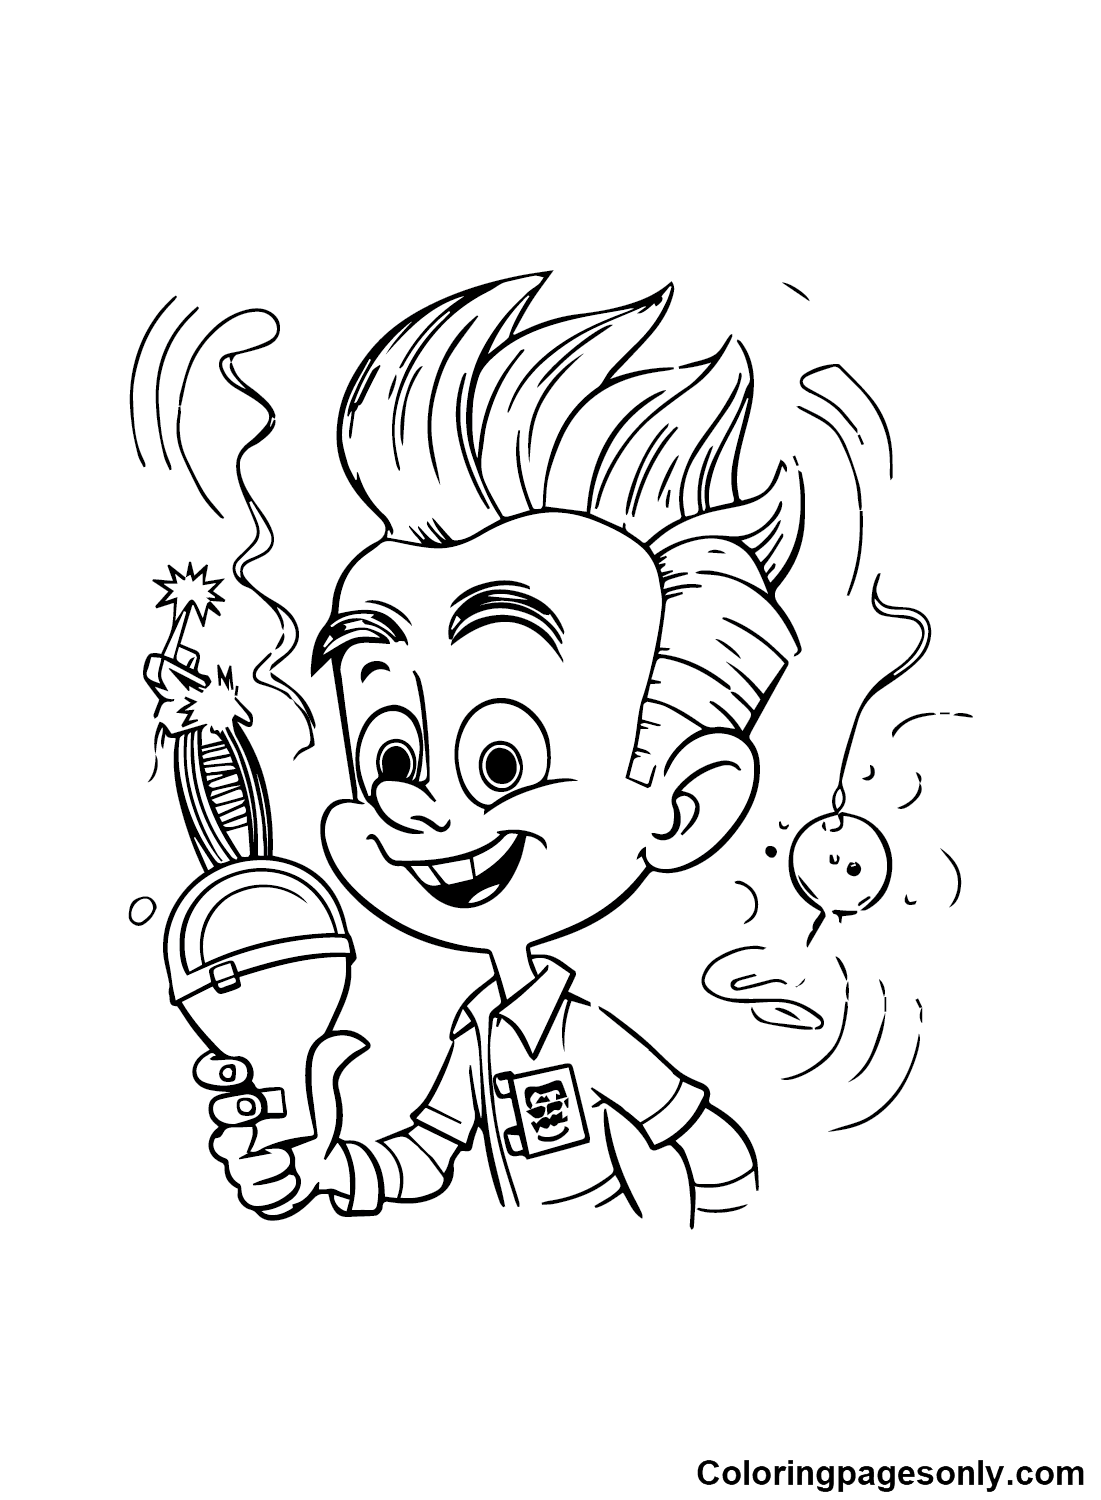 Jimmy Neutron for Kids Coloring Page